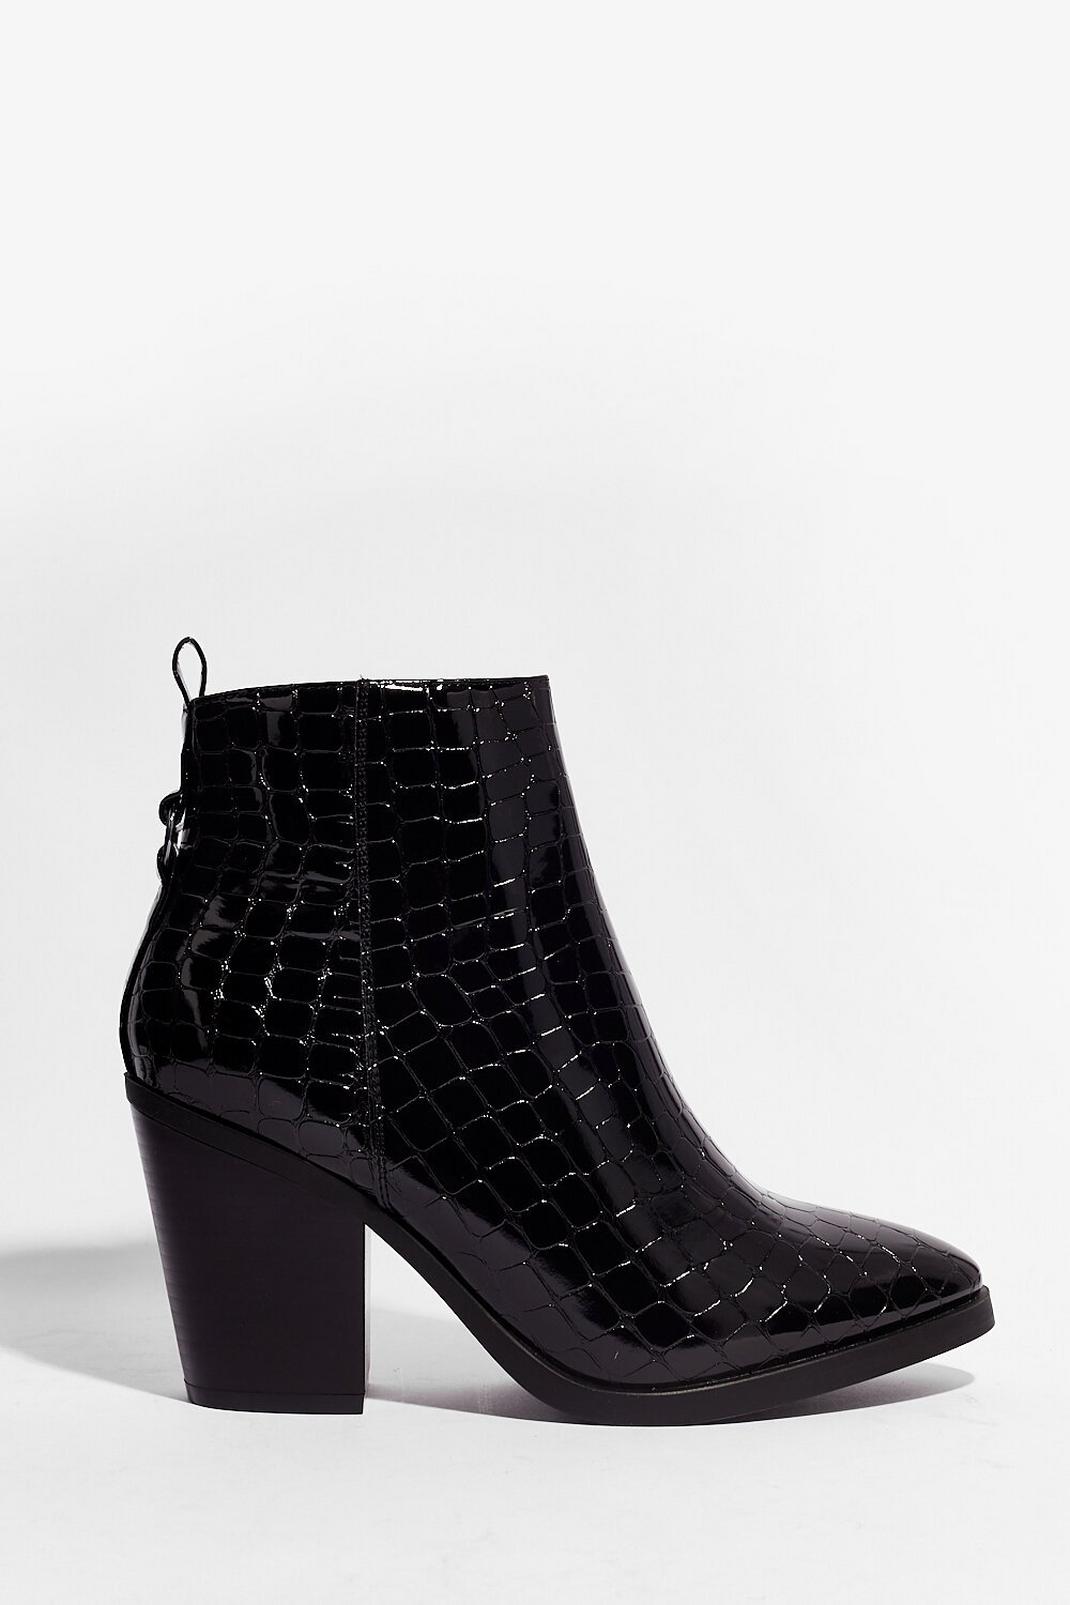 Croc 'Em in Their Tracks Wide Fit Heeled Boots | Nasty Gal